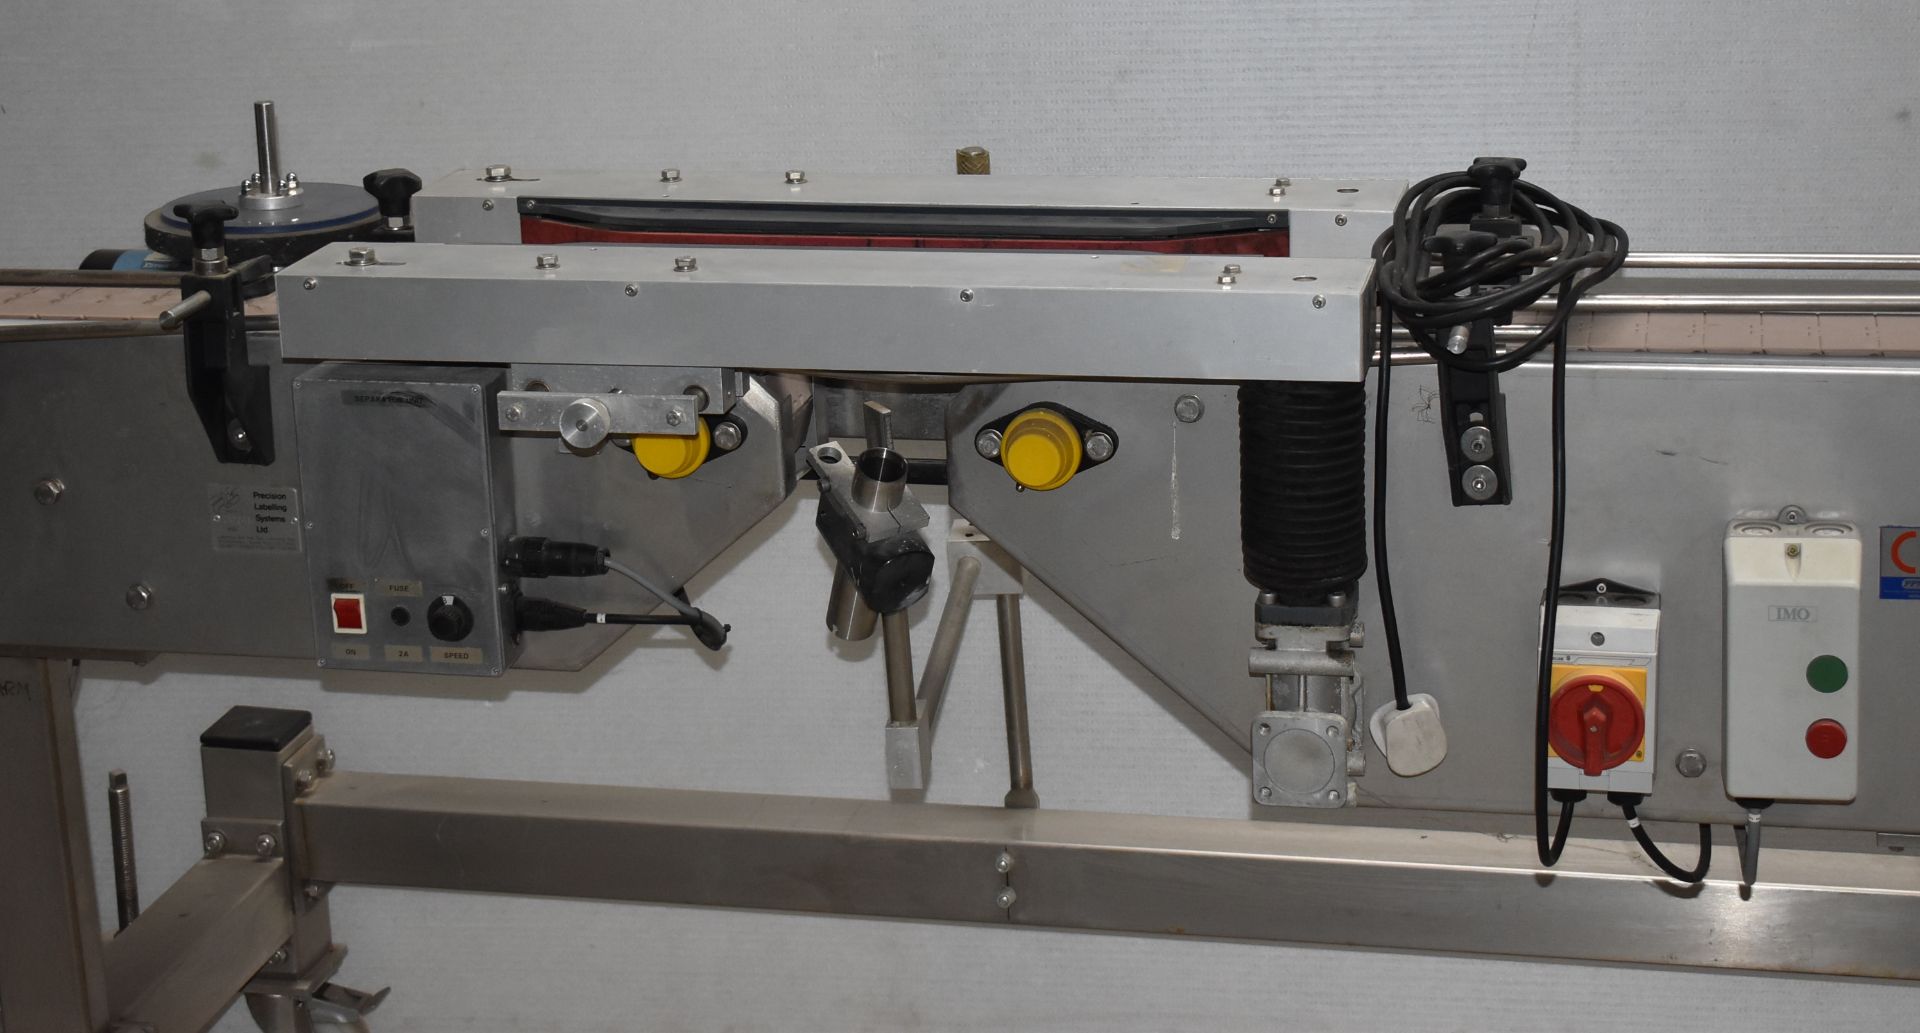 1 x Precision Labelling Systems Conveyor - Part Number 20745 - Approx Size: H100 x W250 cms - - Image 9 of 25